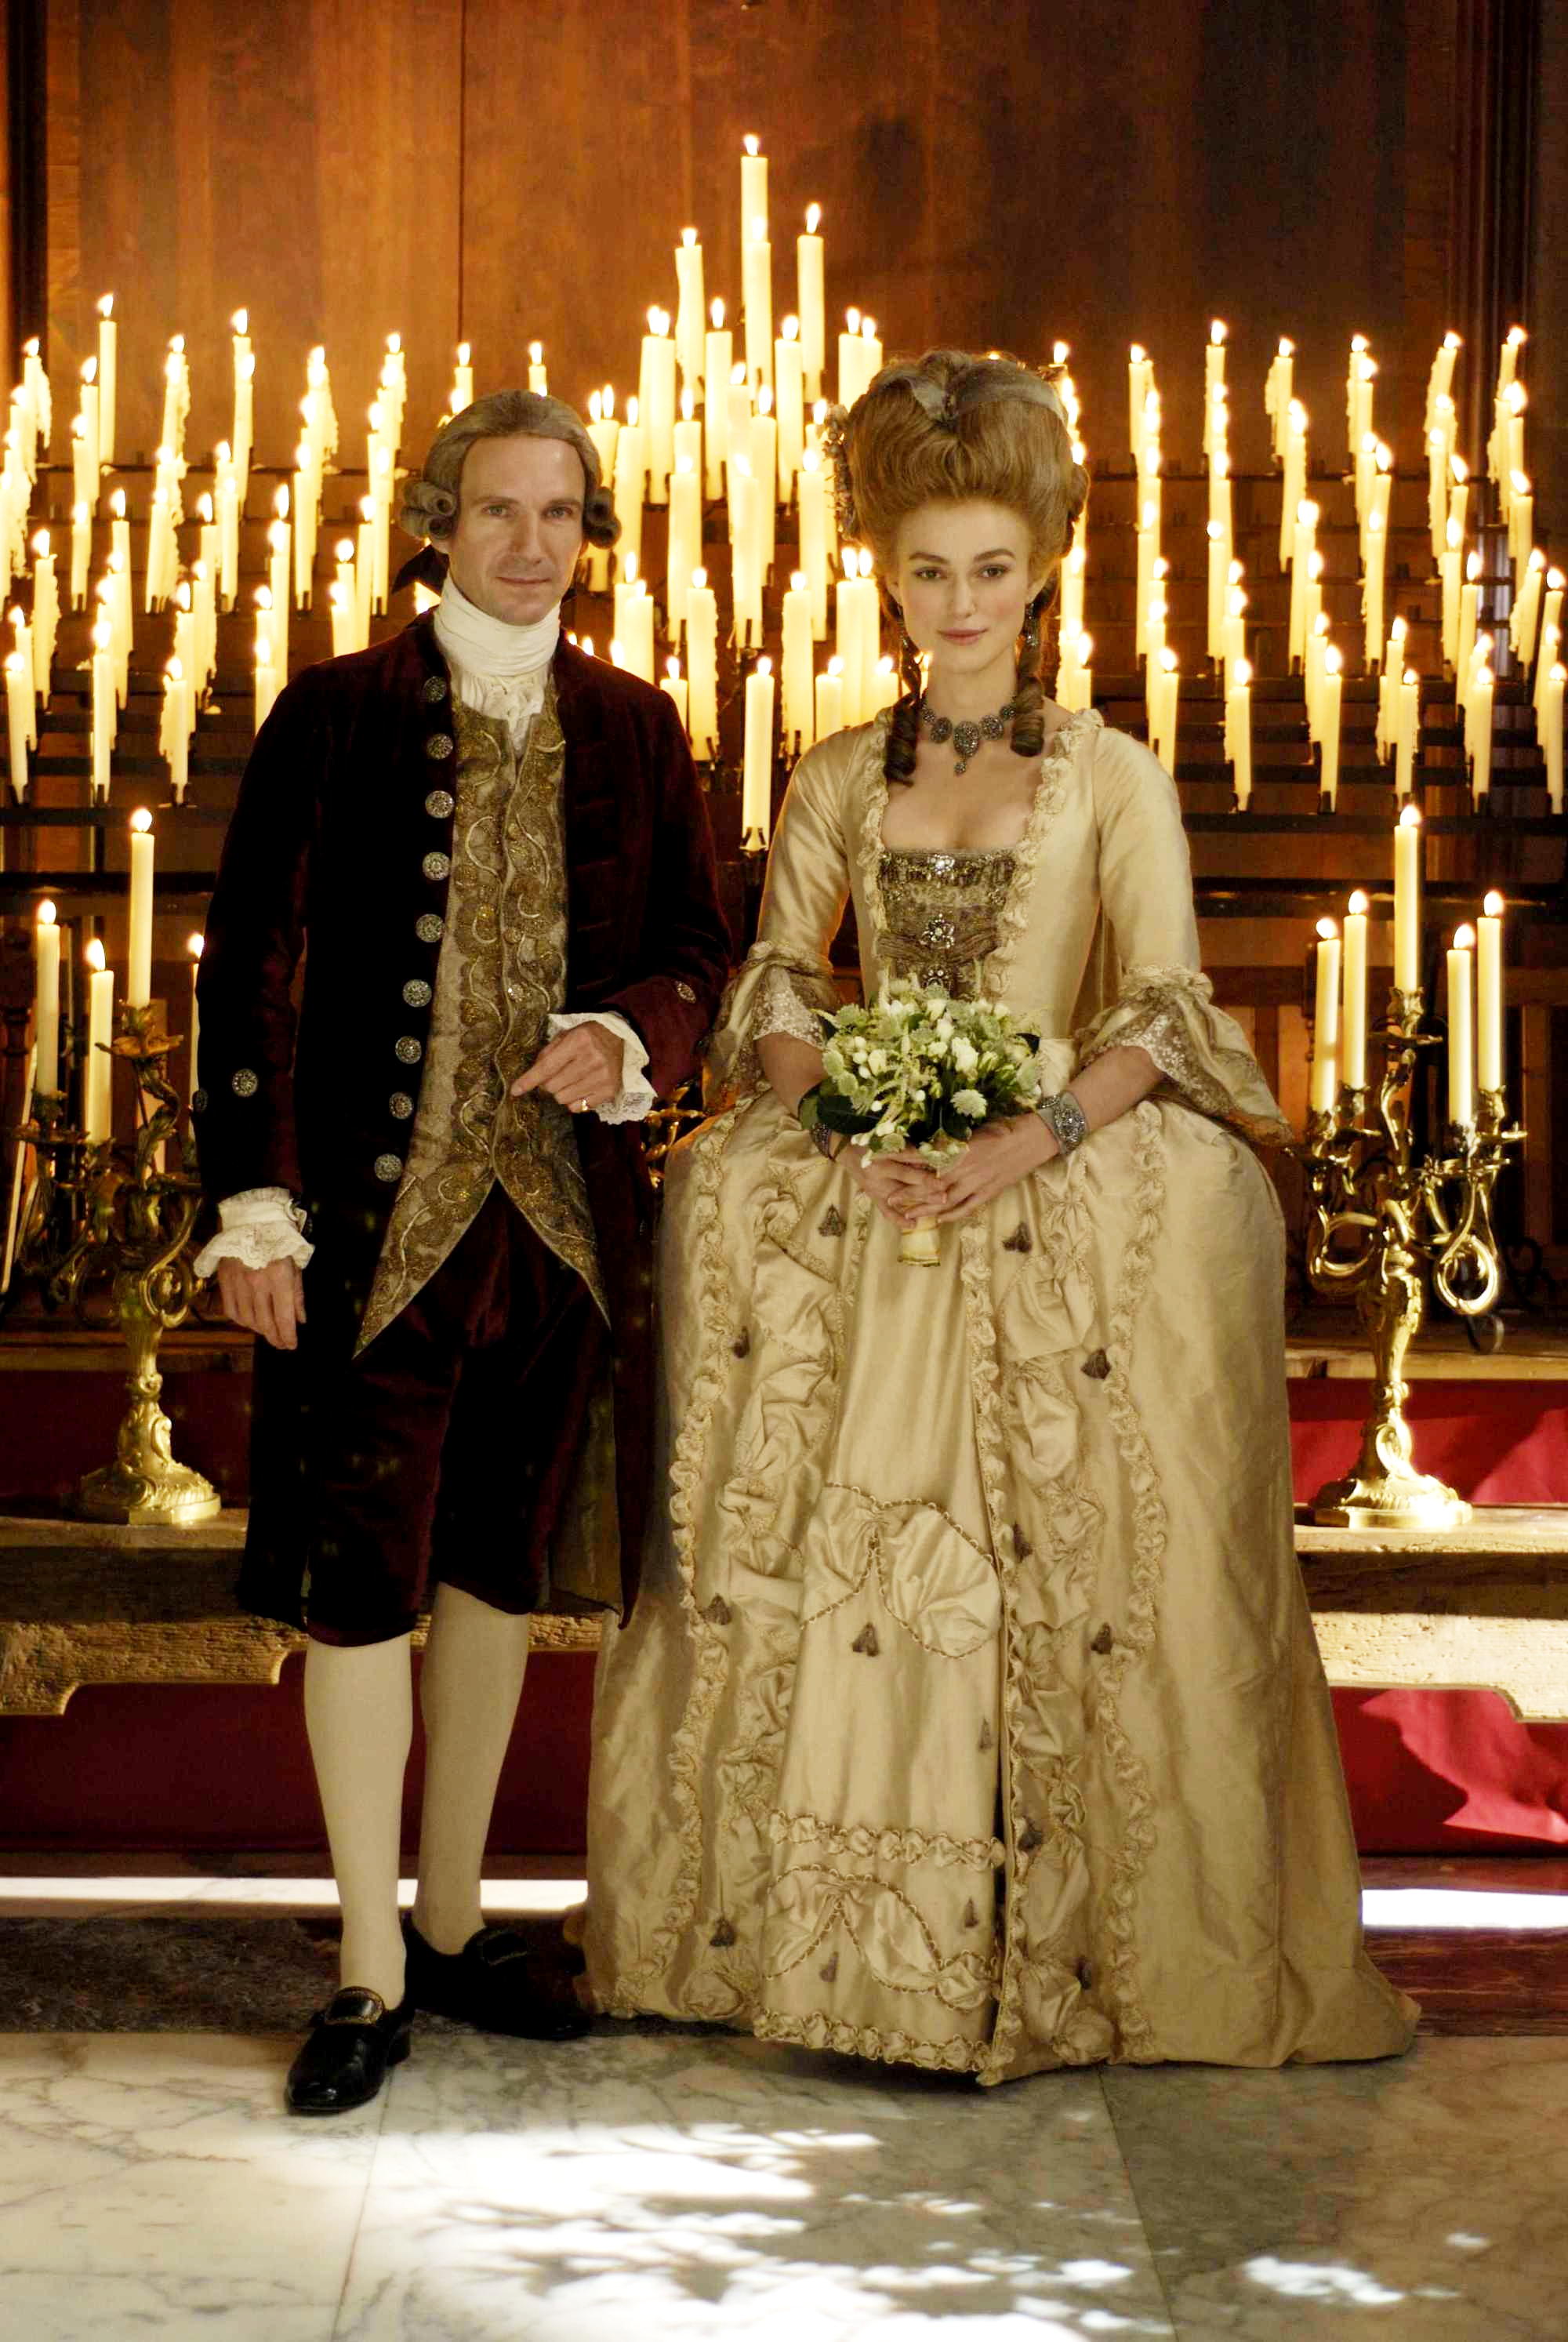 Ralph Fiennes stars as Duke of Devonshire and Keira Knightley stars as Georgiana Spencer, the Duchess of Devonshire in Paramount Vantage's The Dutchess (2008). Photo credit by Nick Wall.